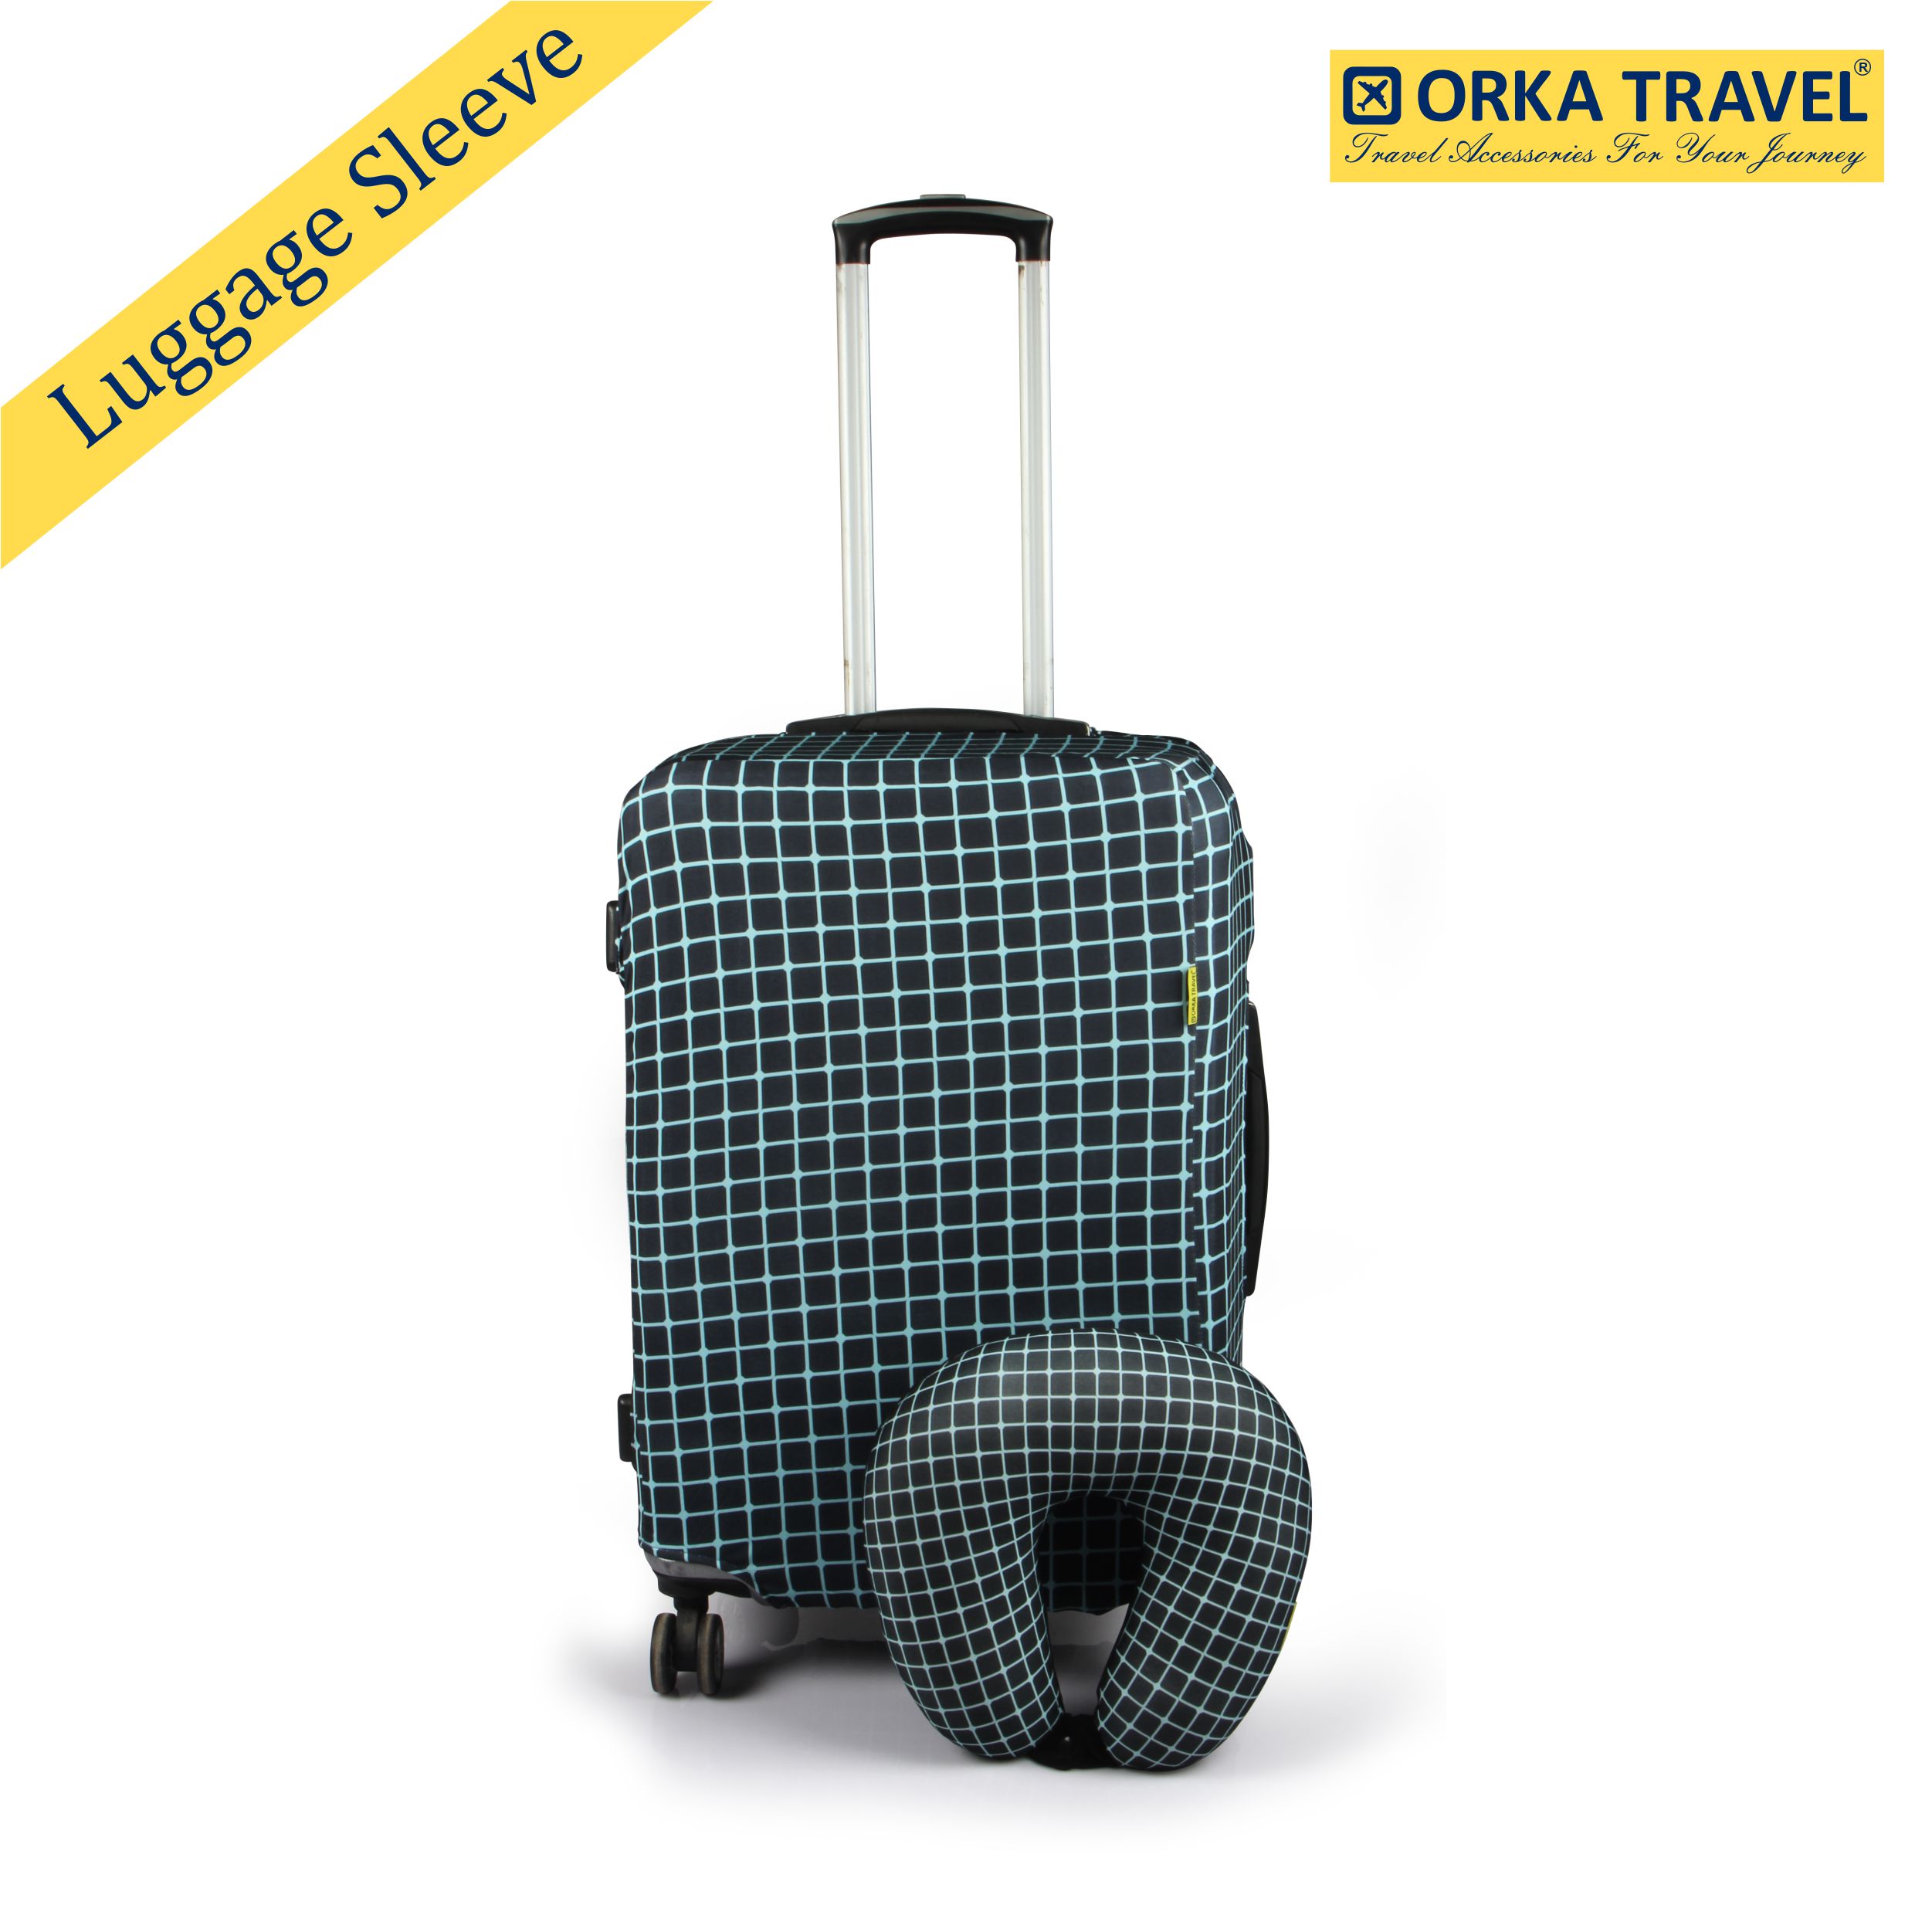 ORKA TRAVEL Black Teal Theme LUGGAGE PROTECTOR WITH MATCHING U NECK PILLOW LUGGAGE COVER  